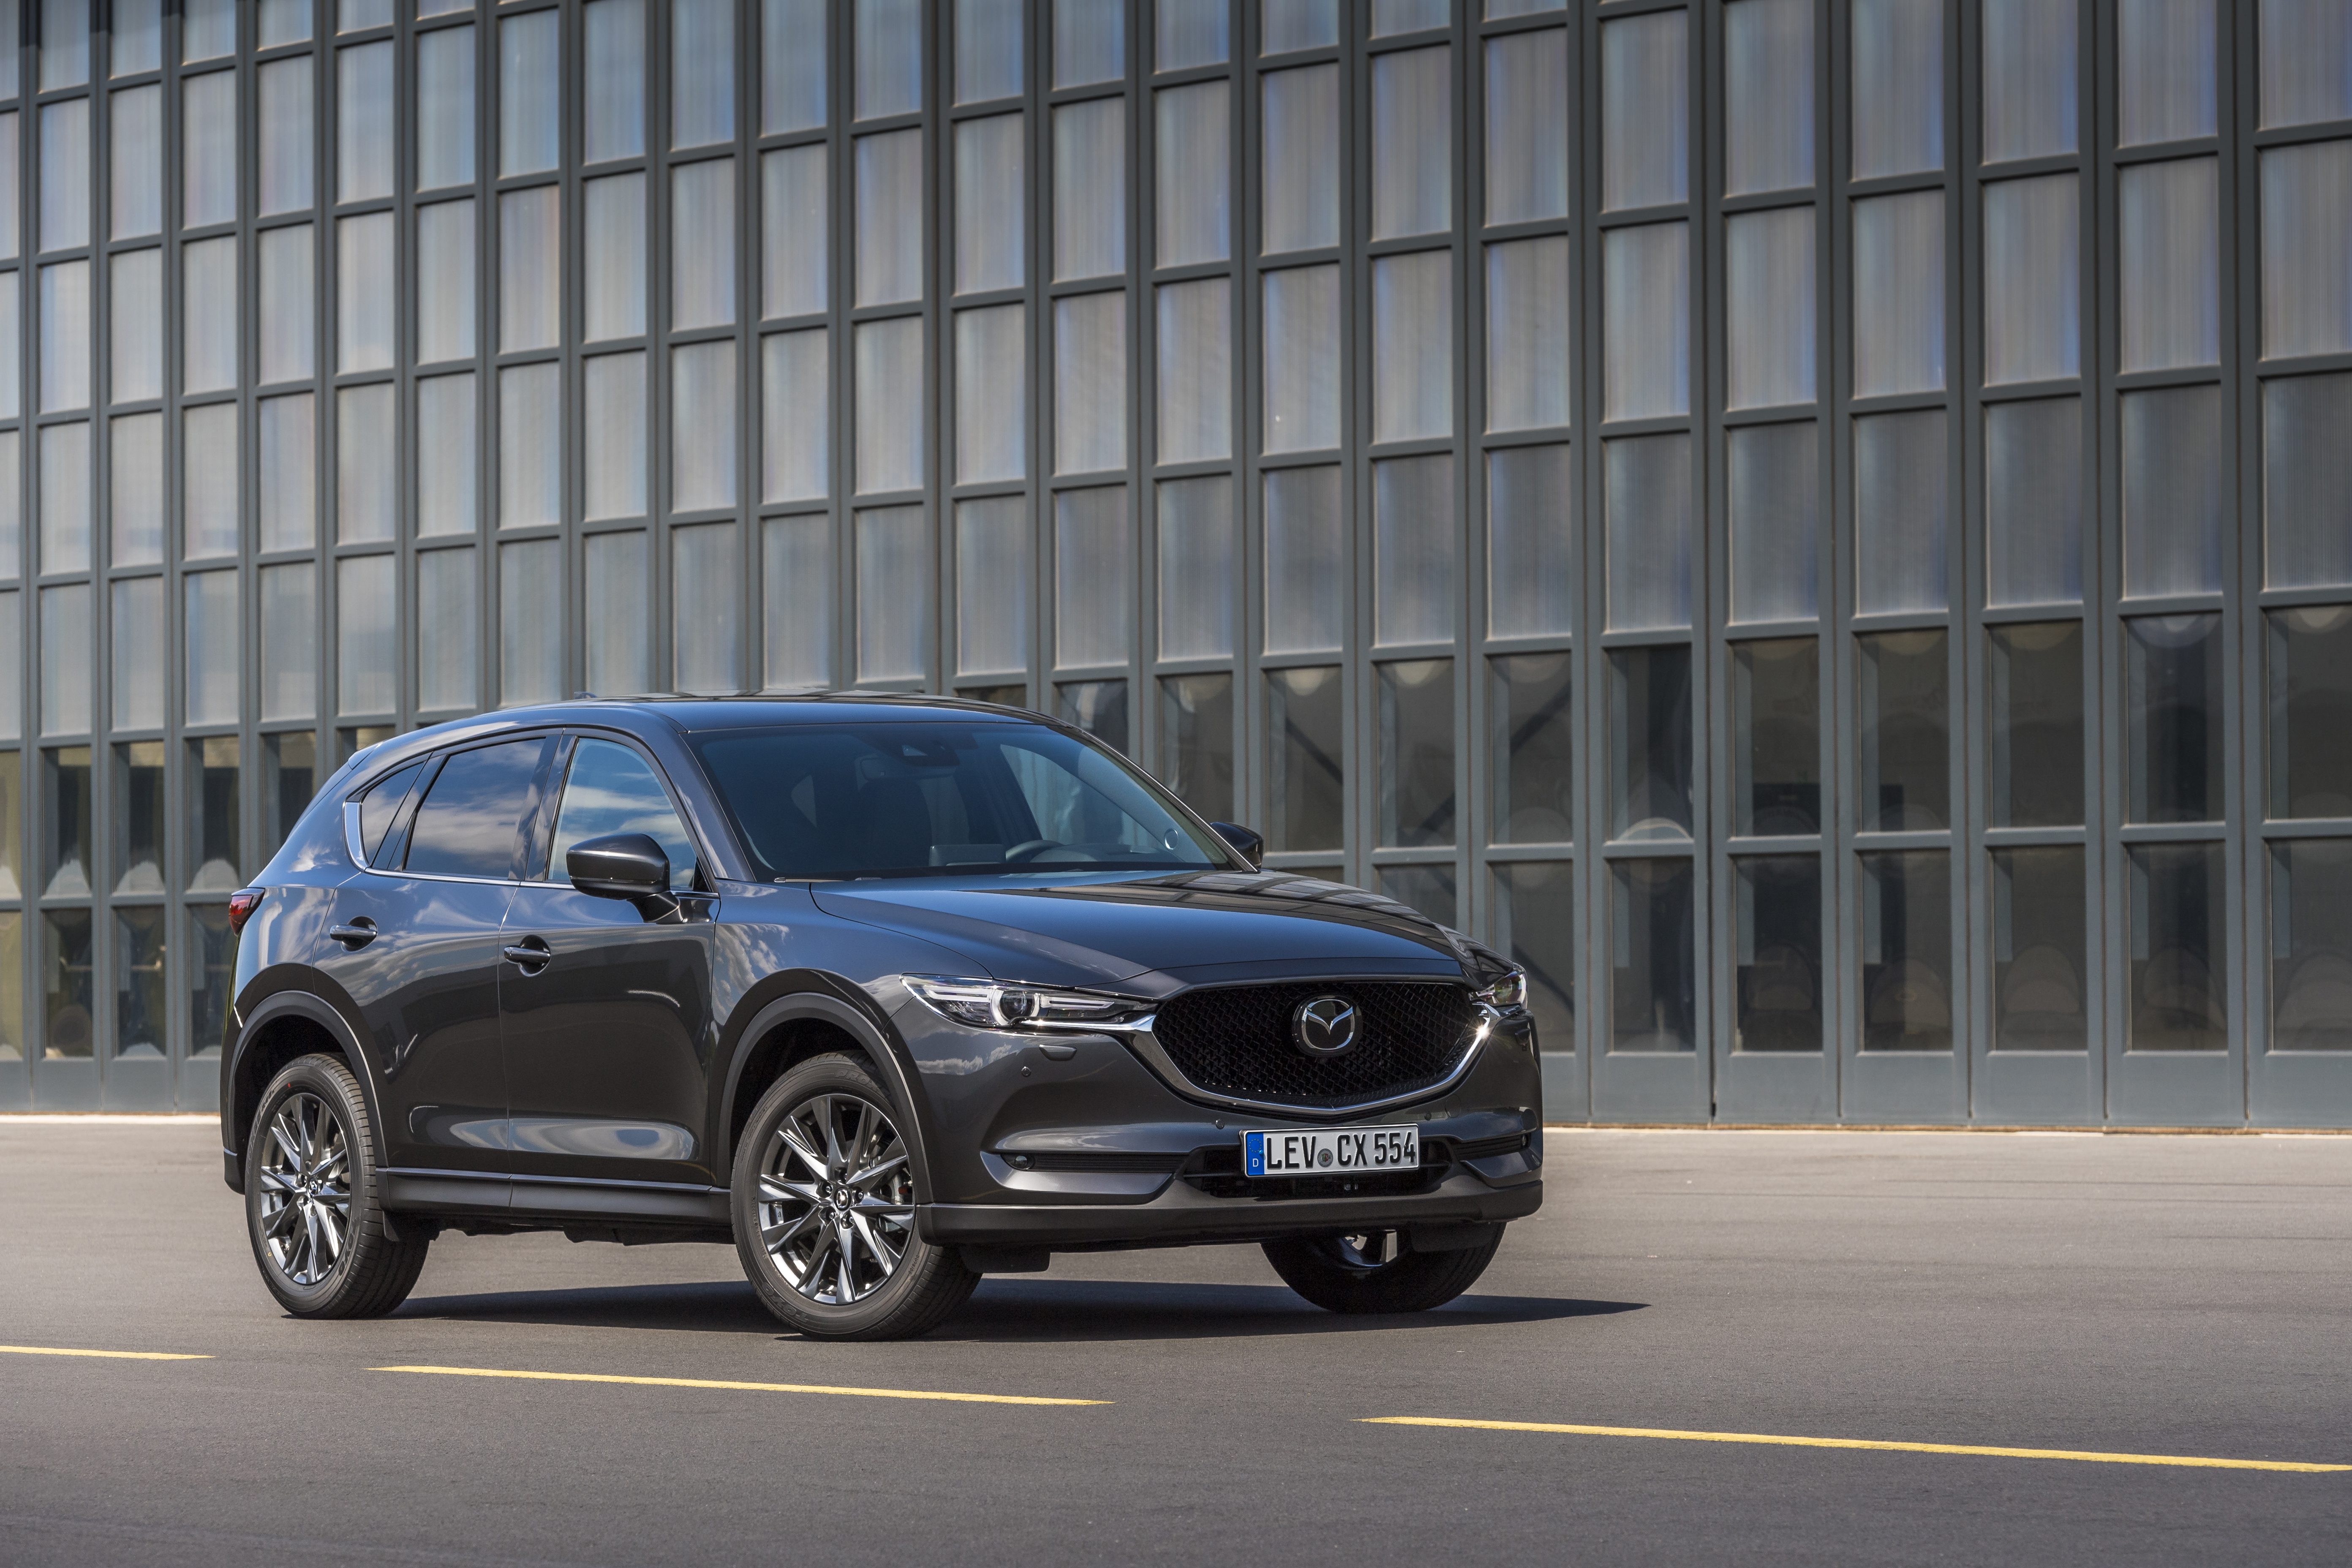 2020 Mazda CX-5 in Europe - new Polymetal Grey, cylinder deactivation ...